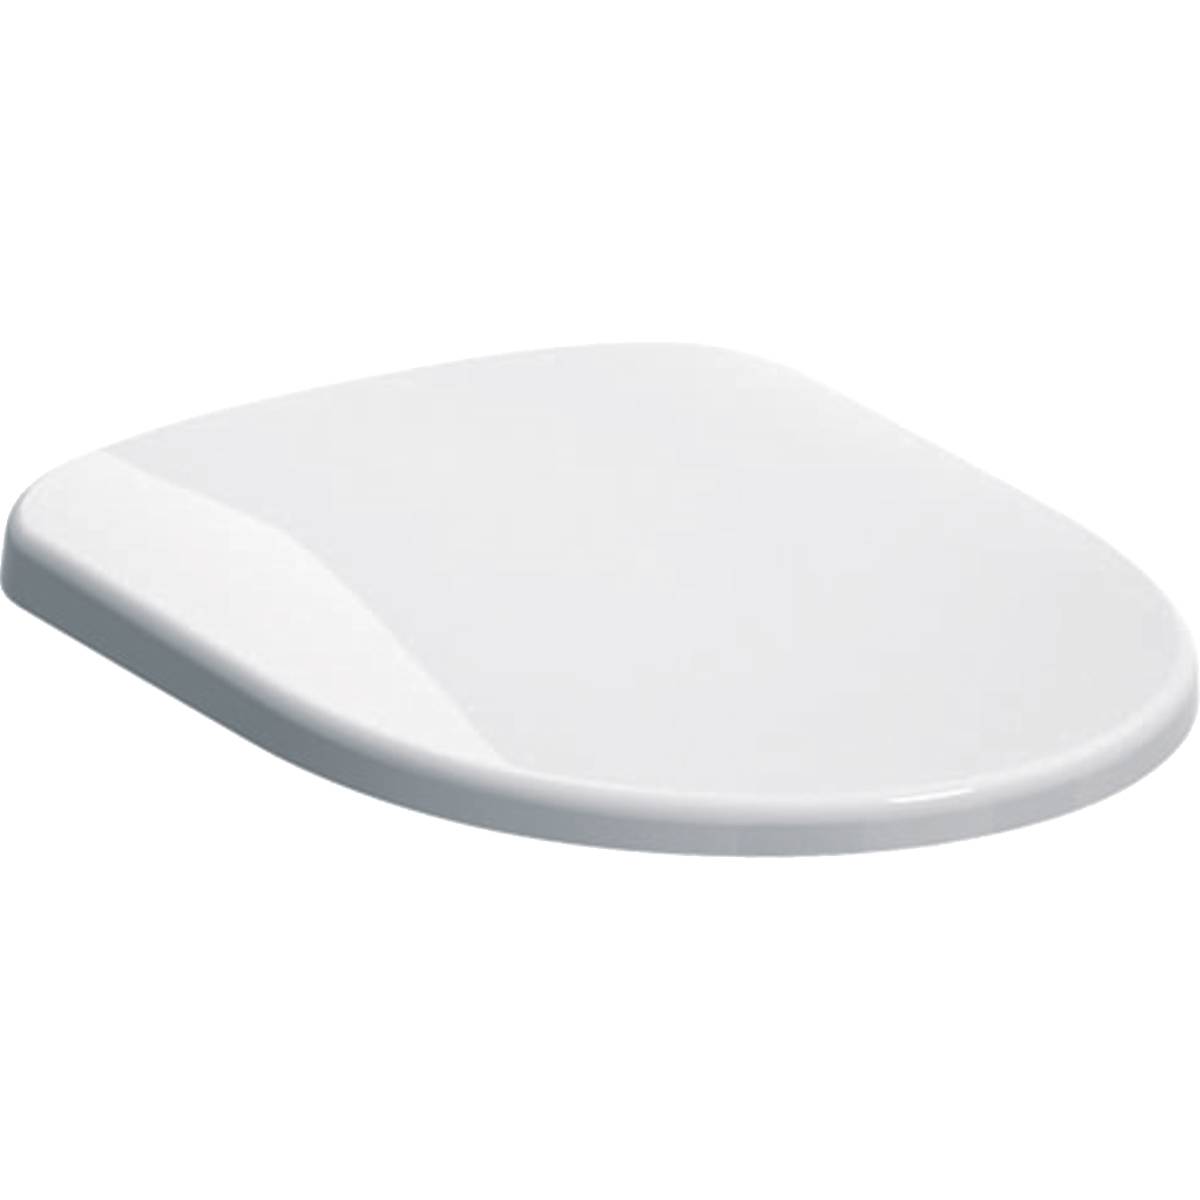 Selnova Compact WC Seat, Fastening From Above